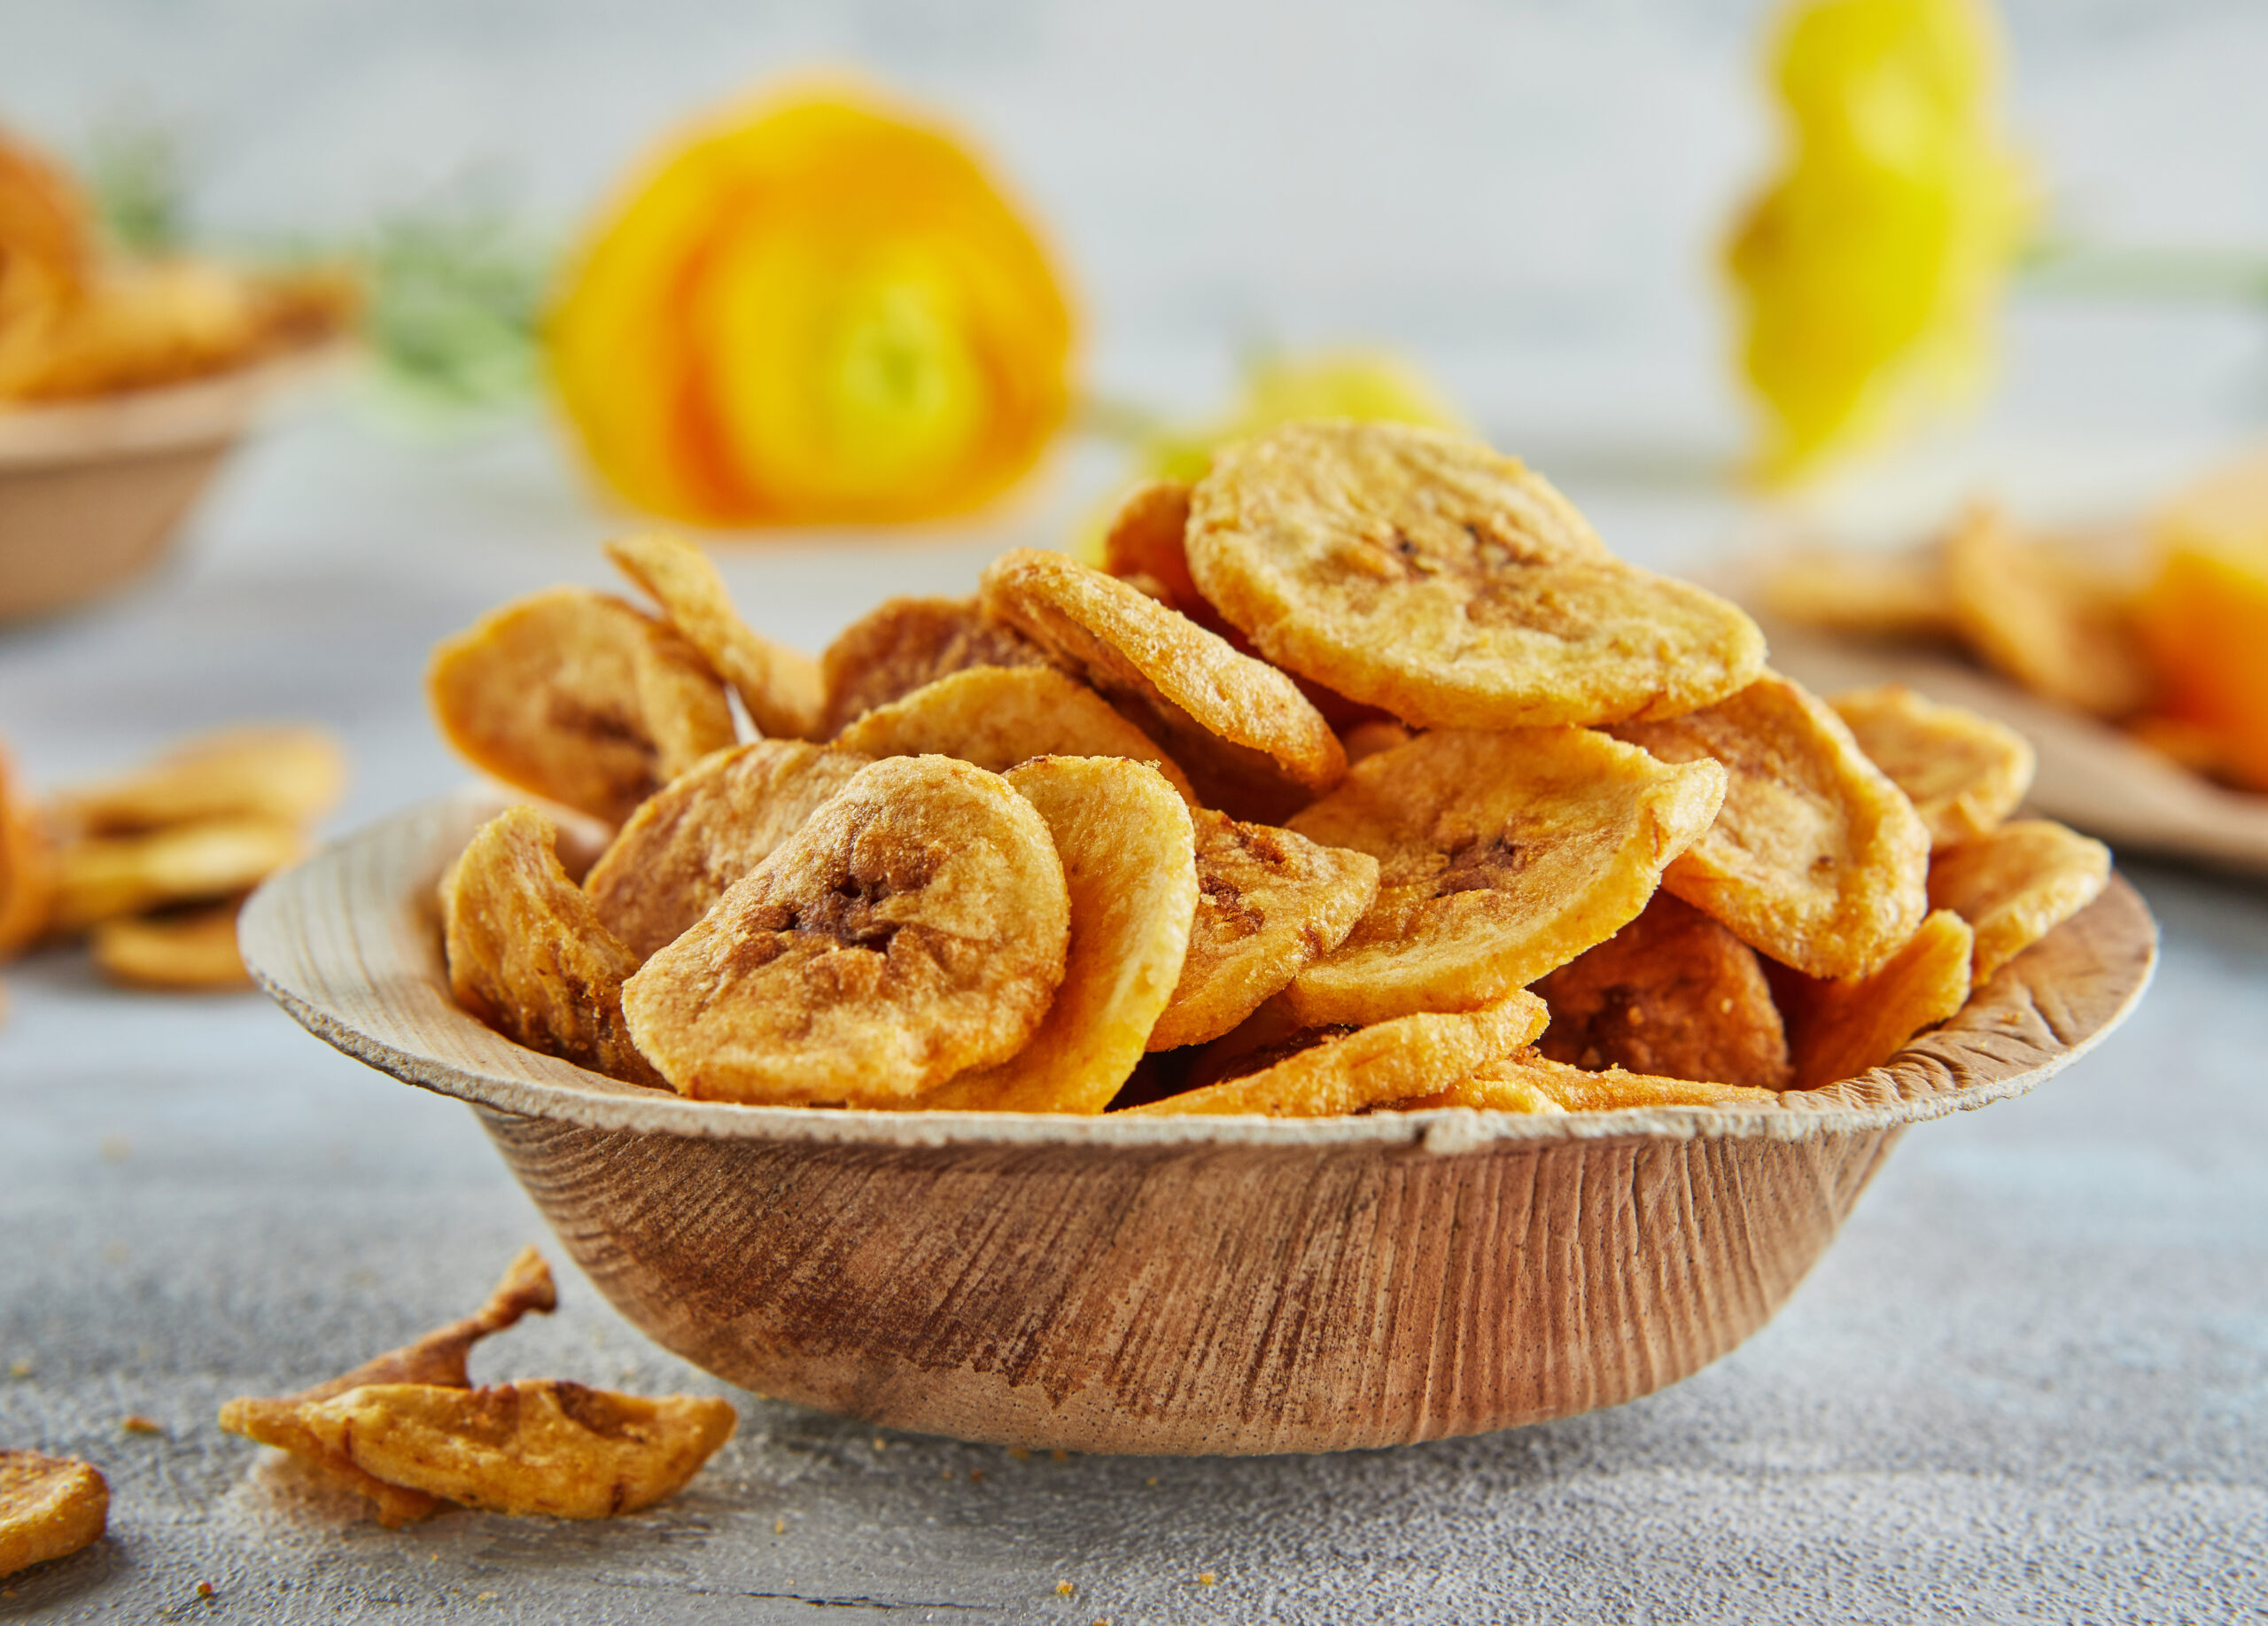 Banana chips healthy food, dry fruits and healthy vegetable chips, healthy vegan snack on background of yellow flowers.